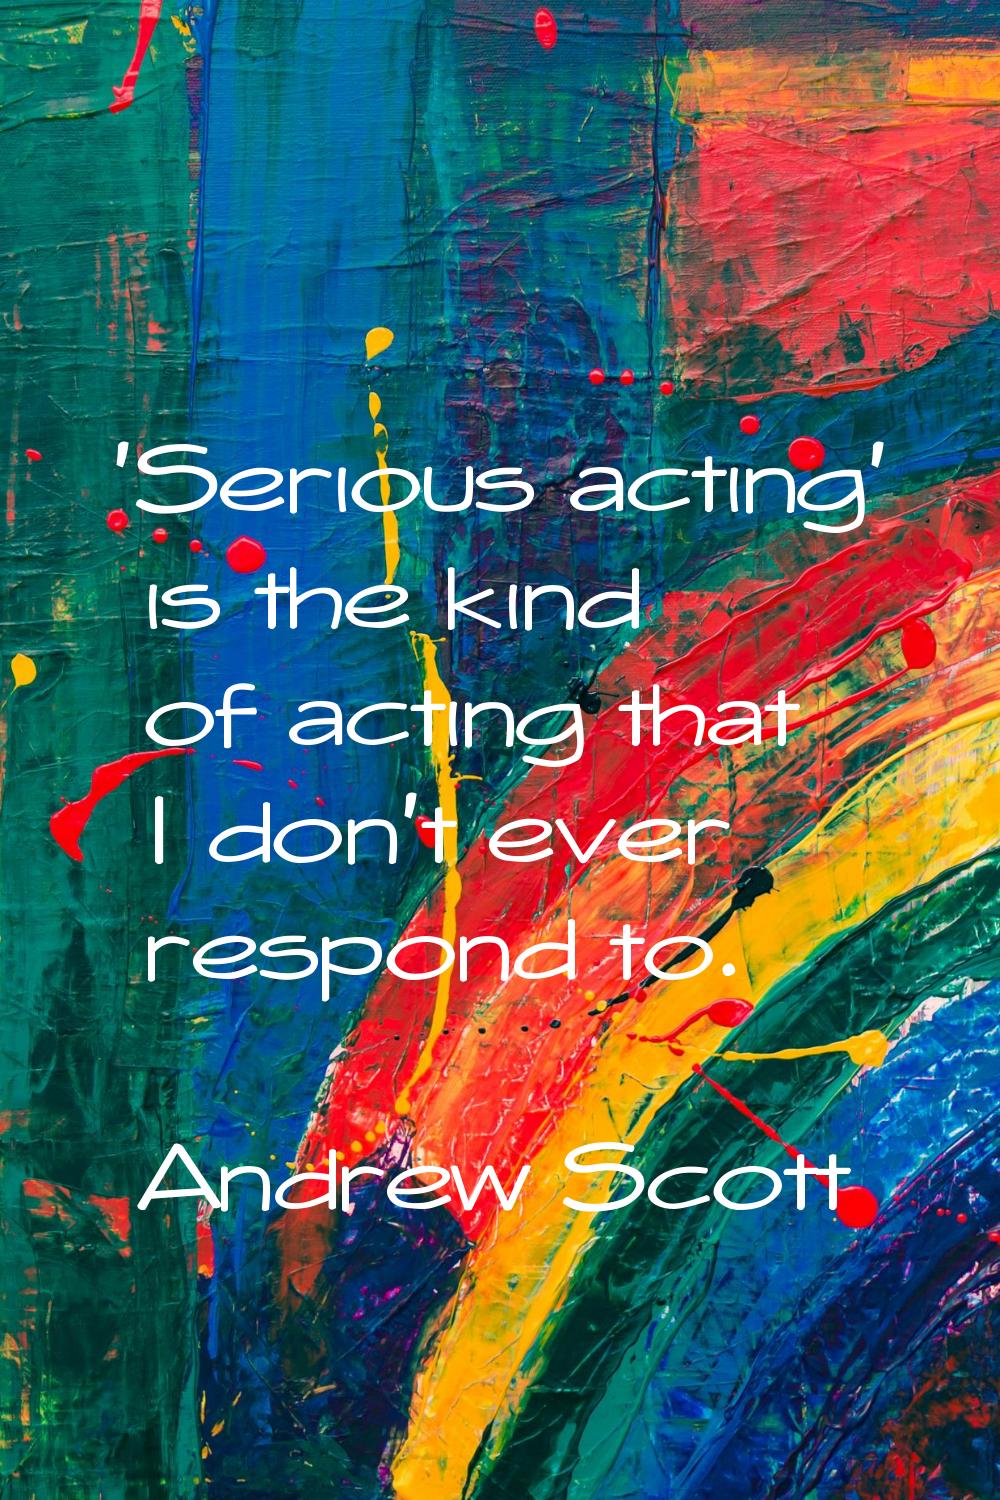 'Serious acting' is the kind of acting that I don't ever respond to.